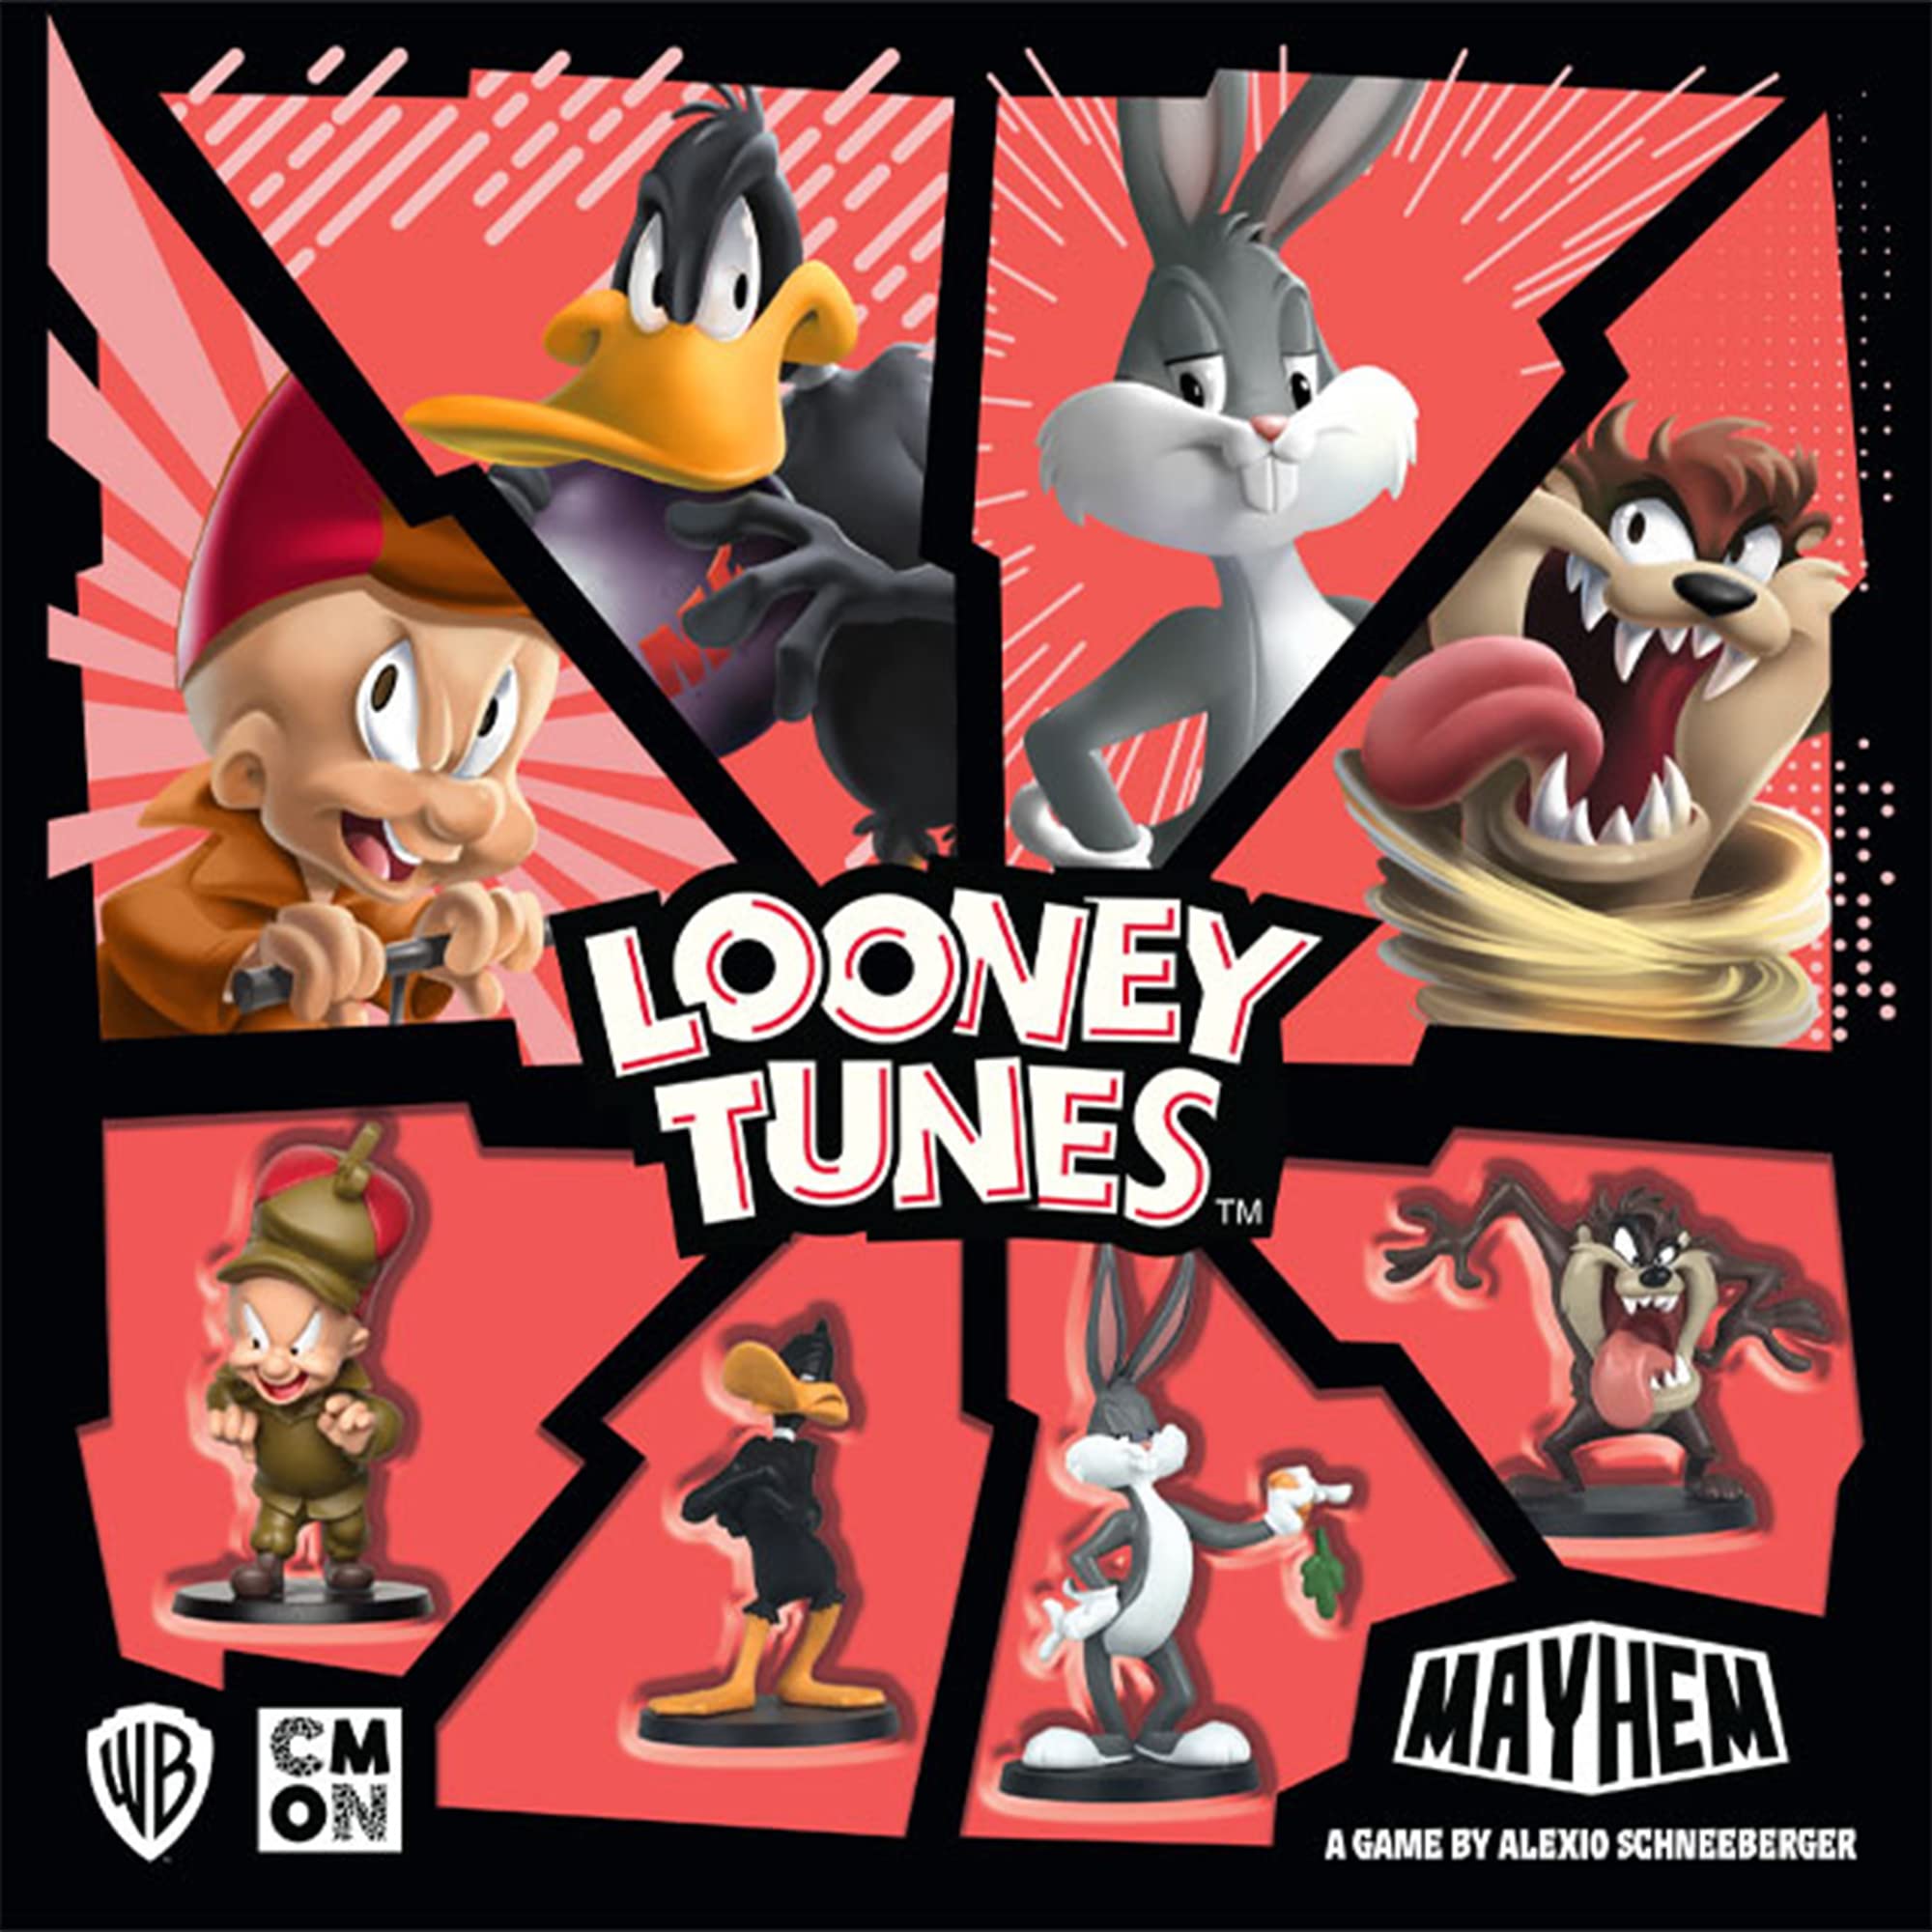 Looney Tunes Mayhem Board Game | Strategy Game Based on The Hit TV Series | Team-Based Combat Game for Adults and Kids | Ages 10+ | 2-4 Players | Average Playtime 30 Minutes | Made by CMON